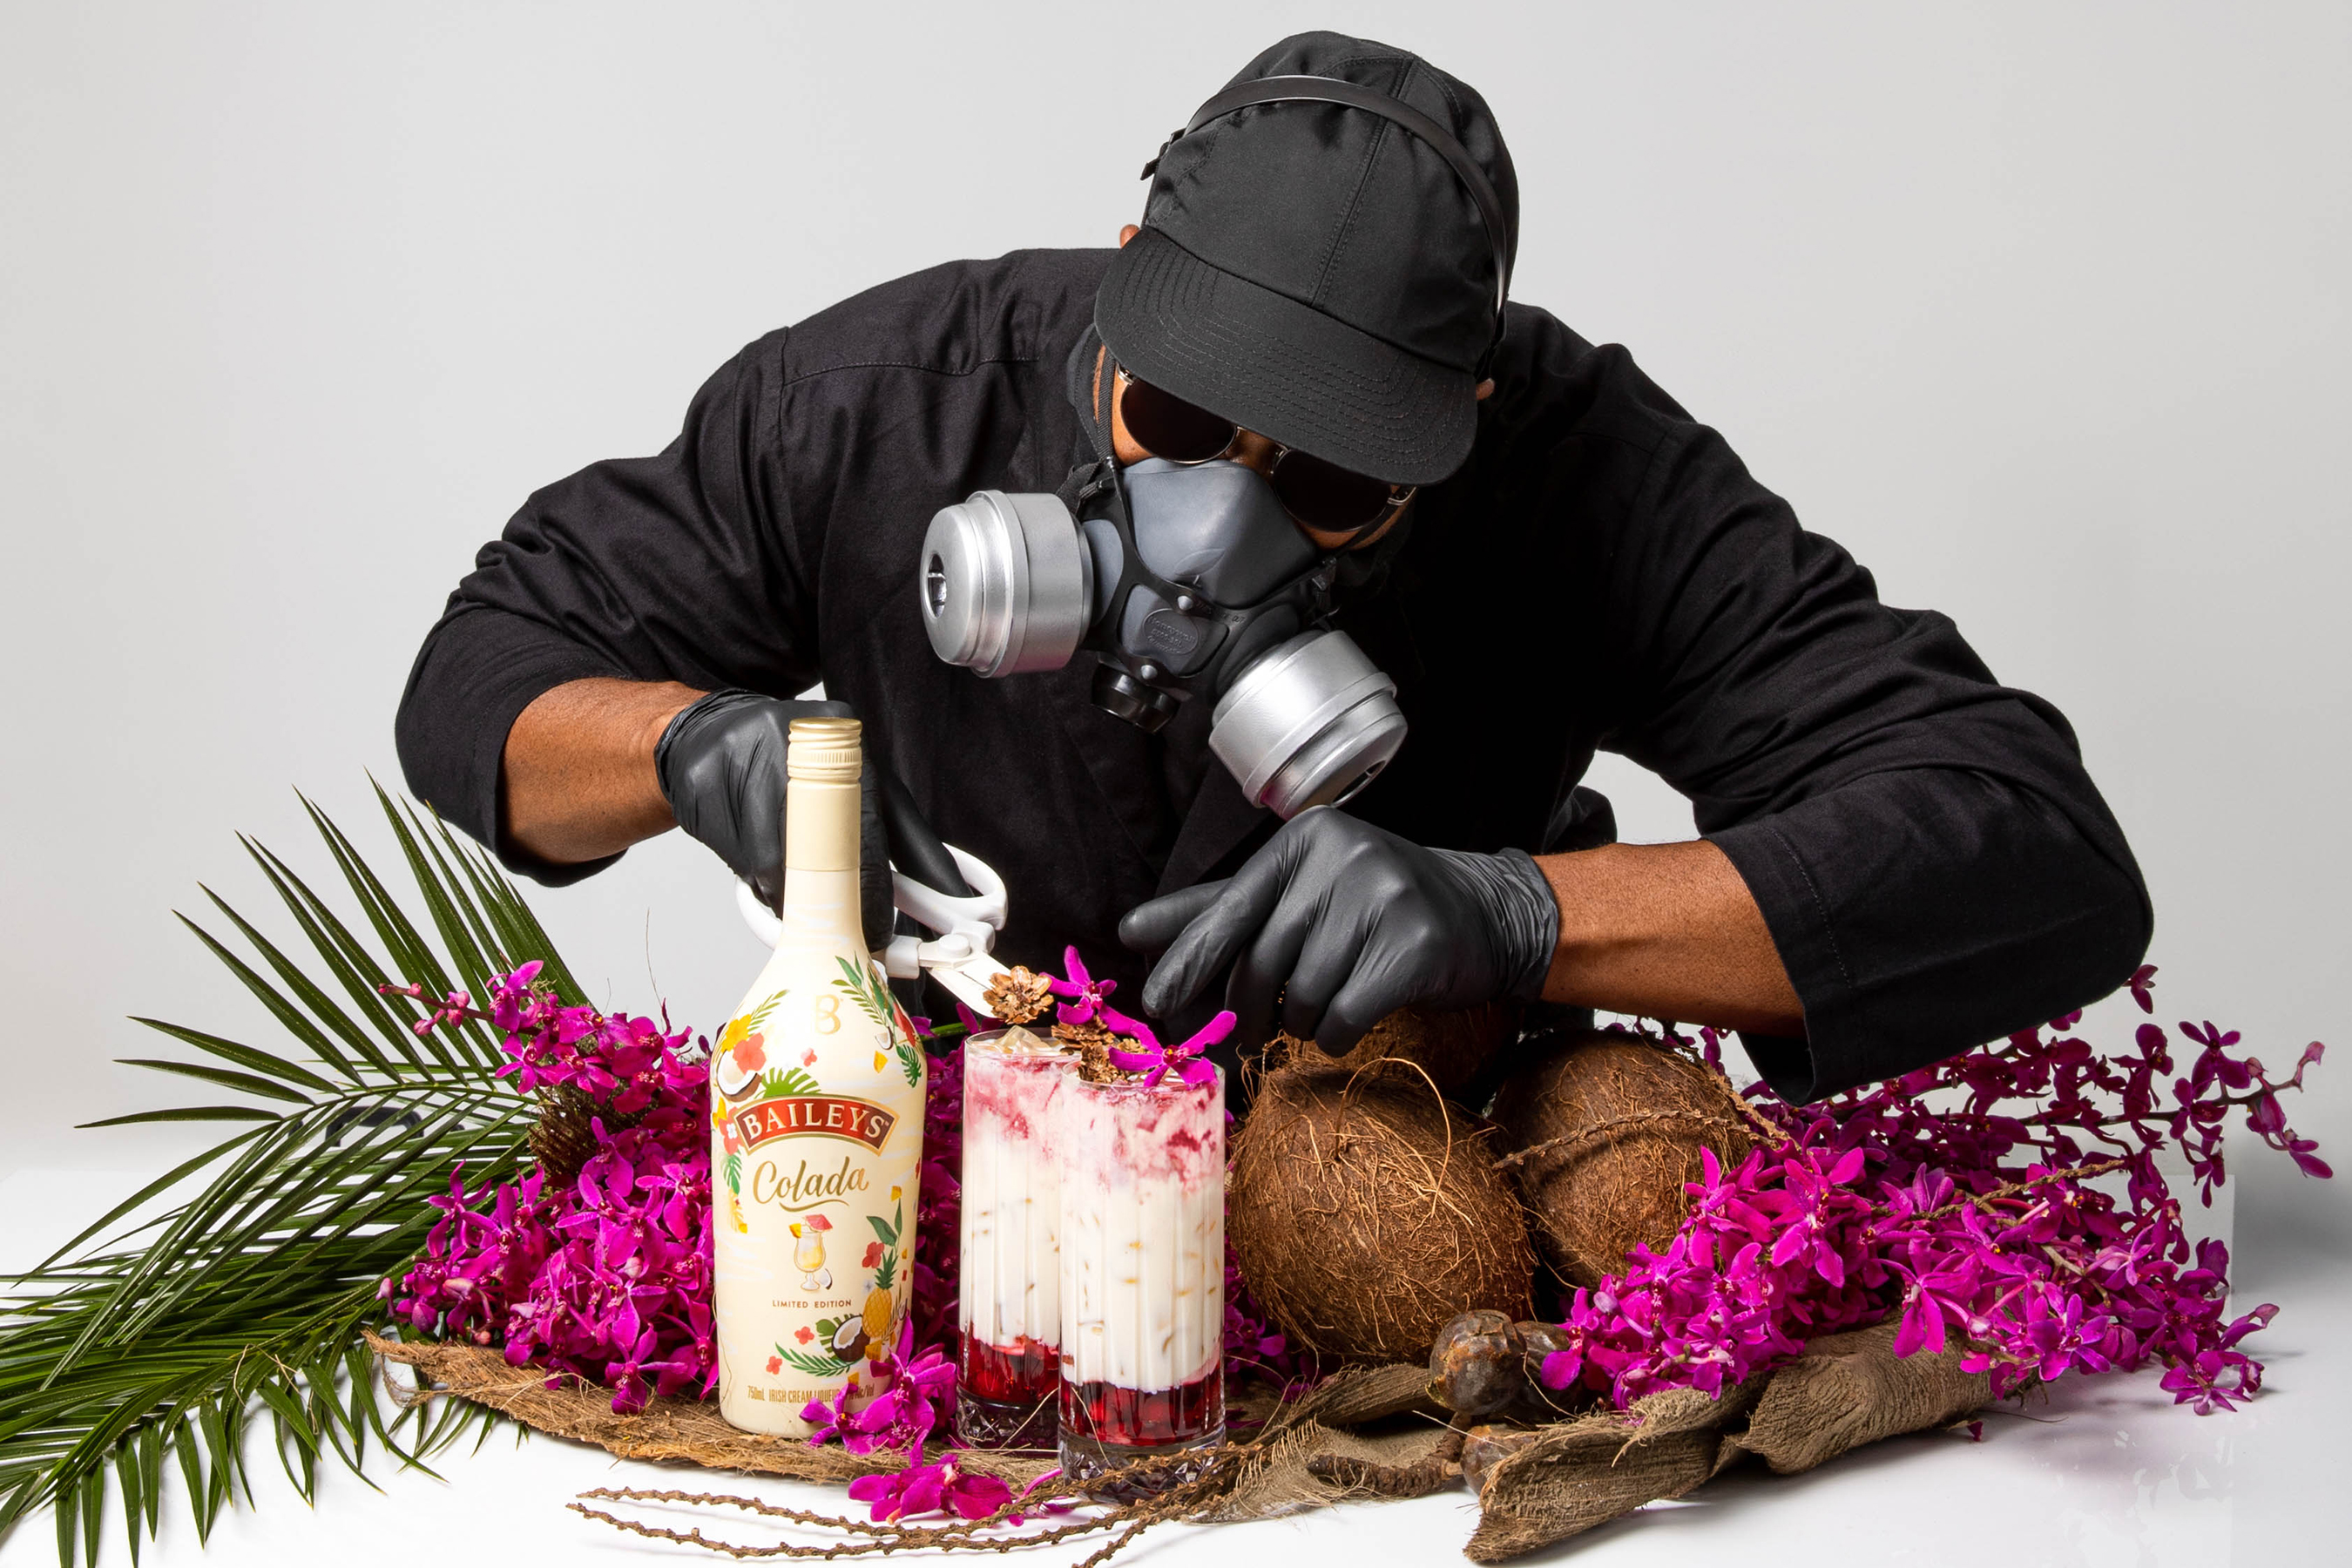 Mr. Flower Fantastic pairs the Coquito Colada with a coconut and orchid floral garnish